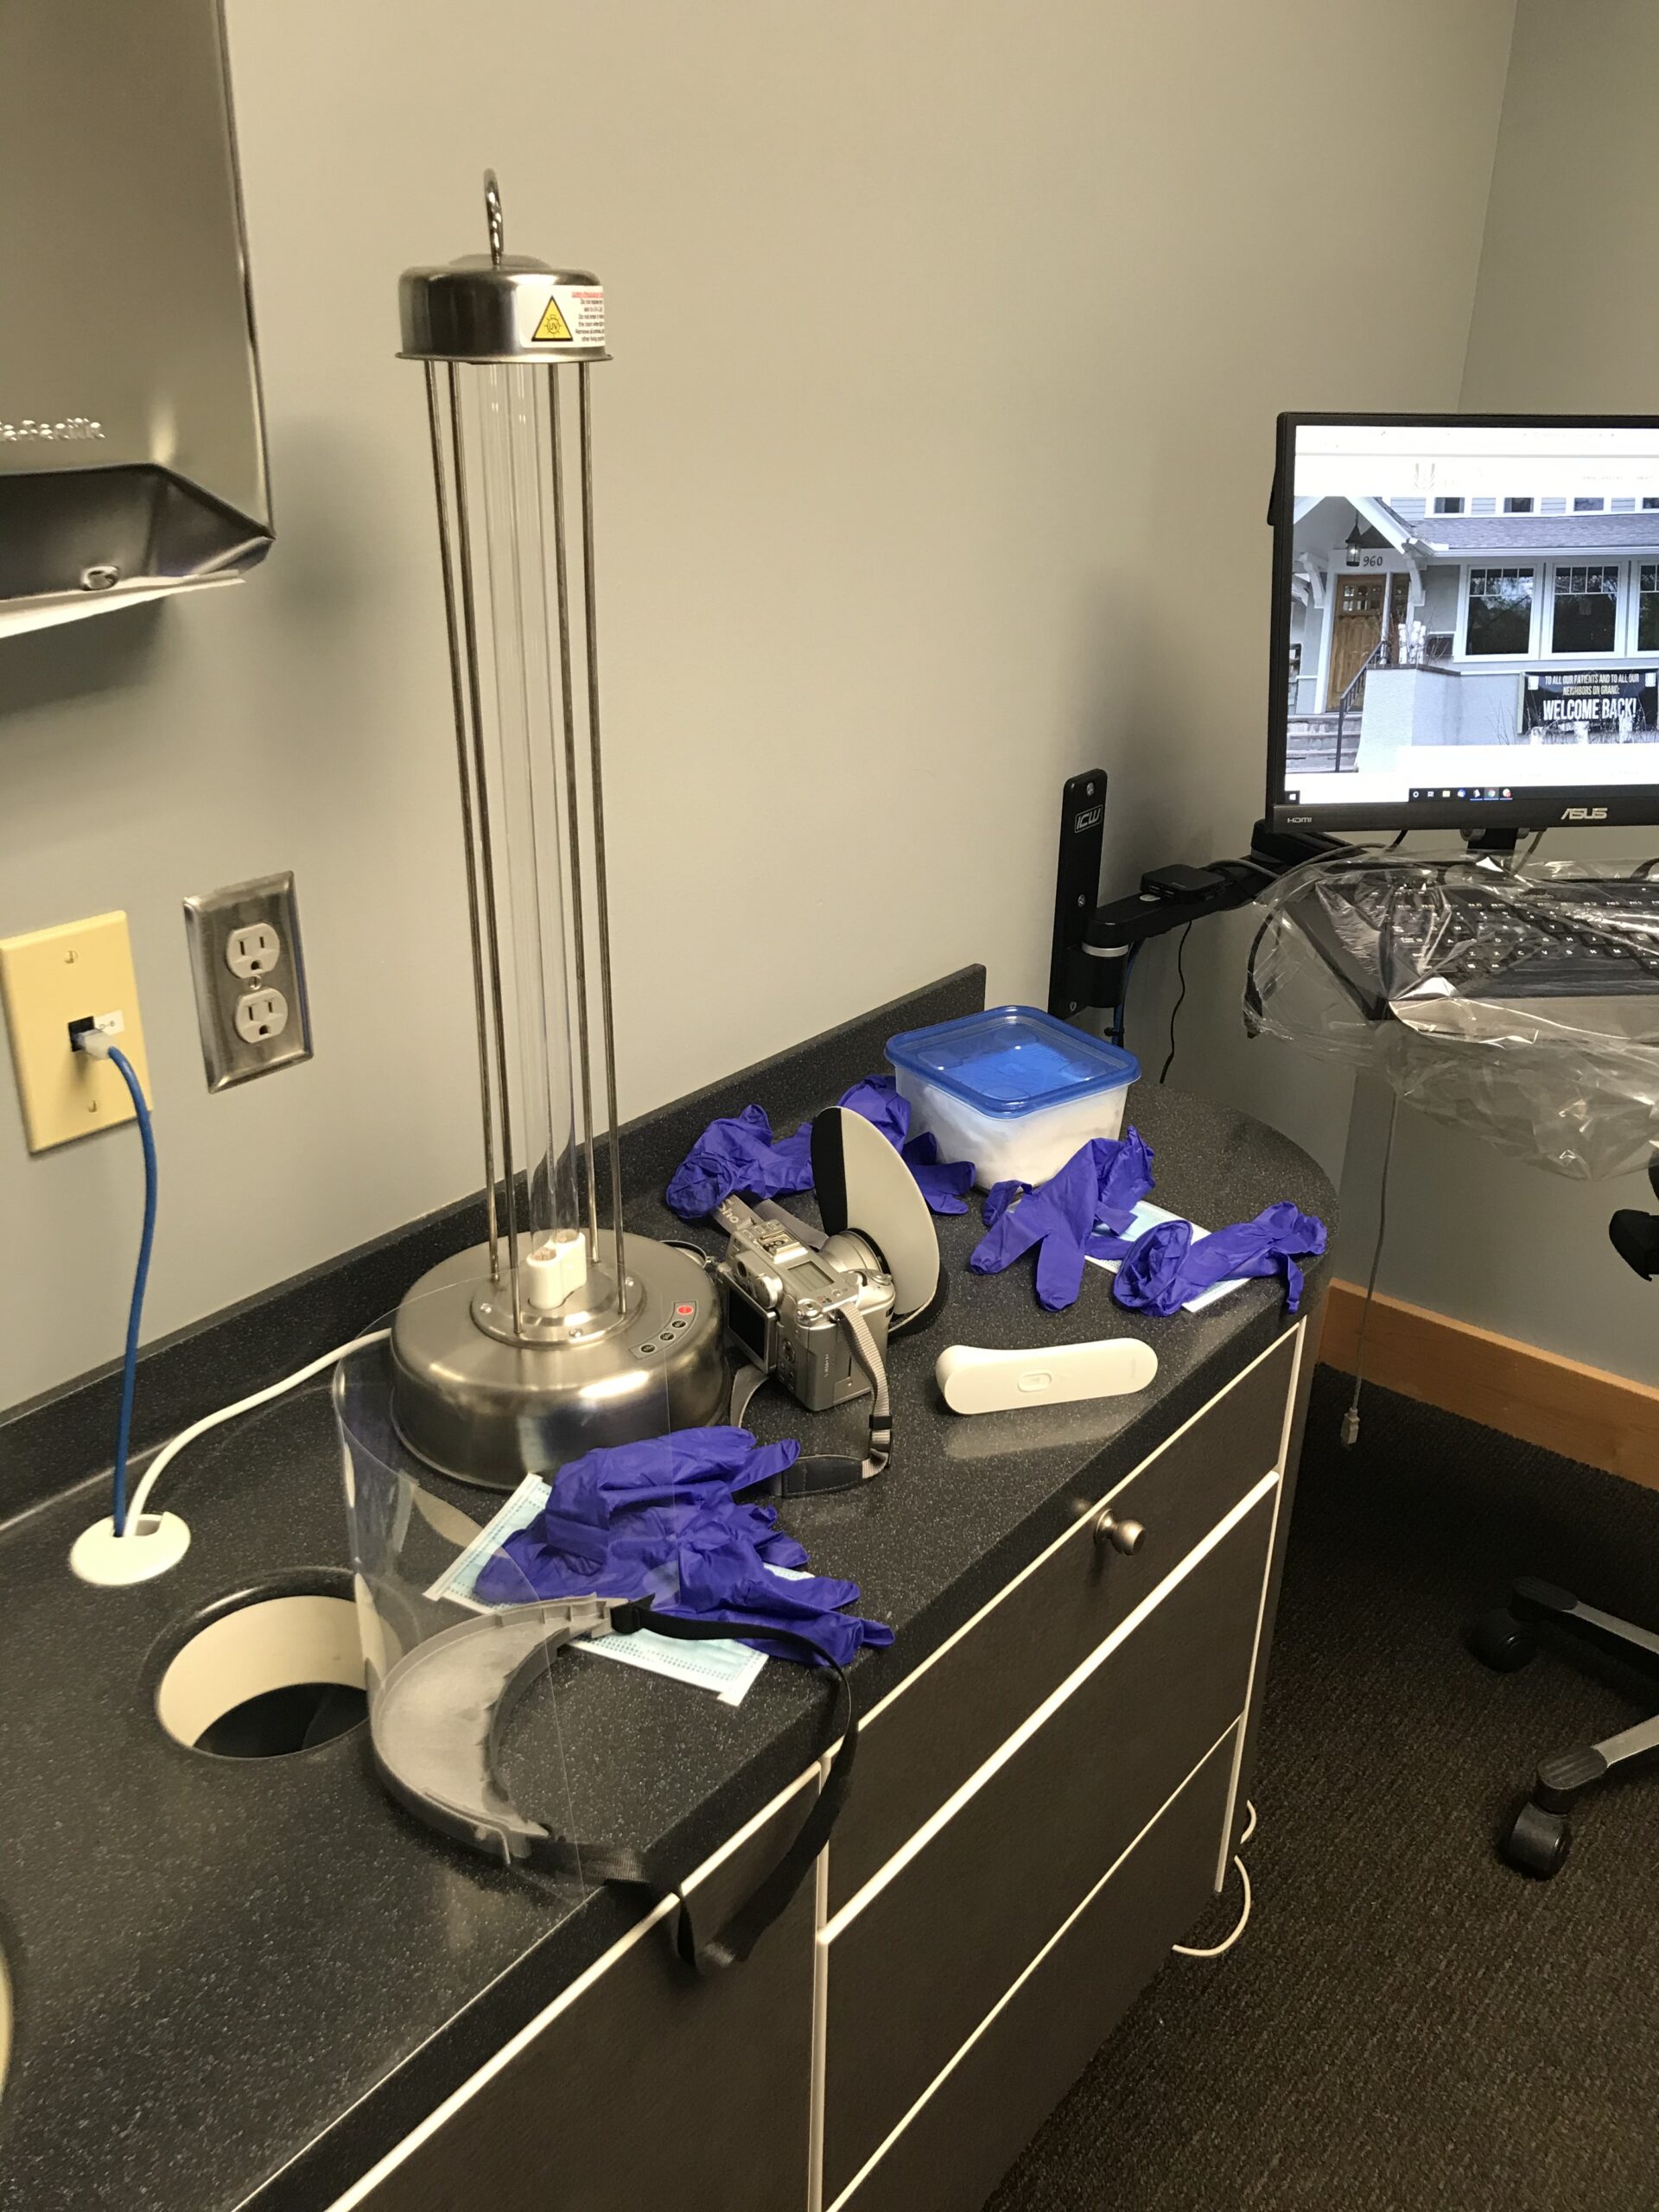 Covid-19 room sterilization and pre-appointment safety set-up.